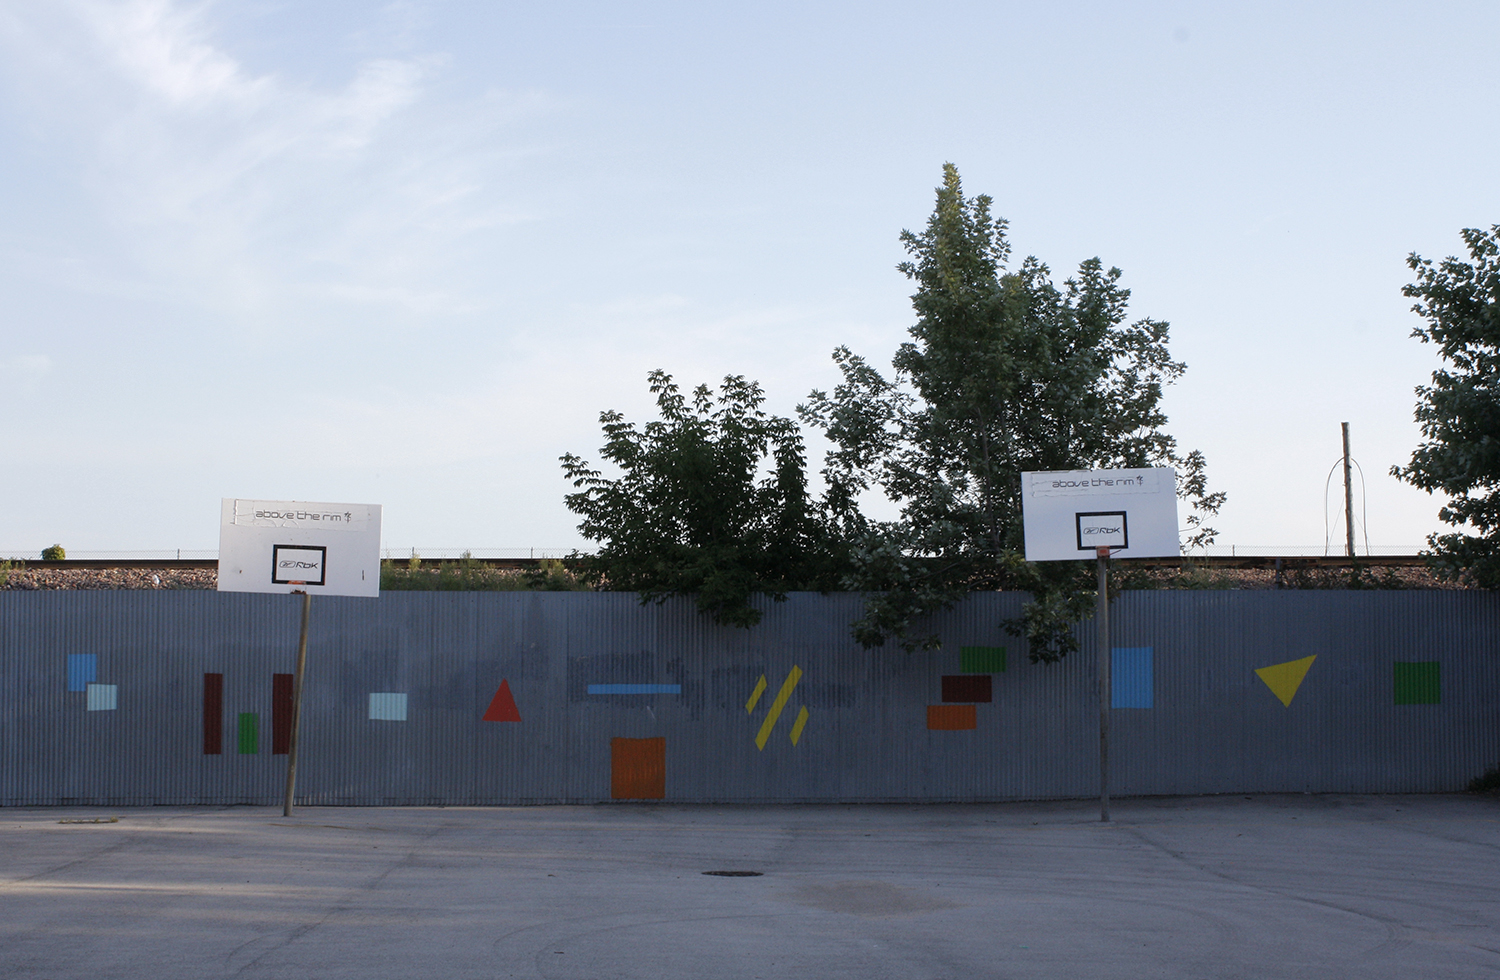 Basketball court at Laura S. Ward Elementary